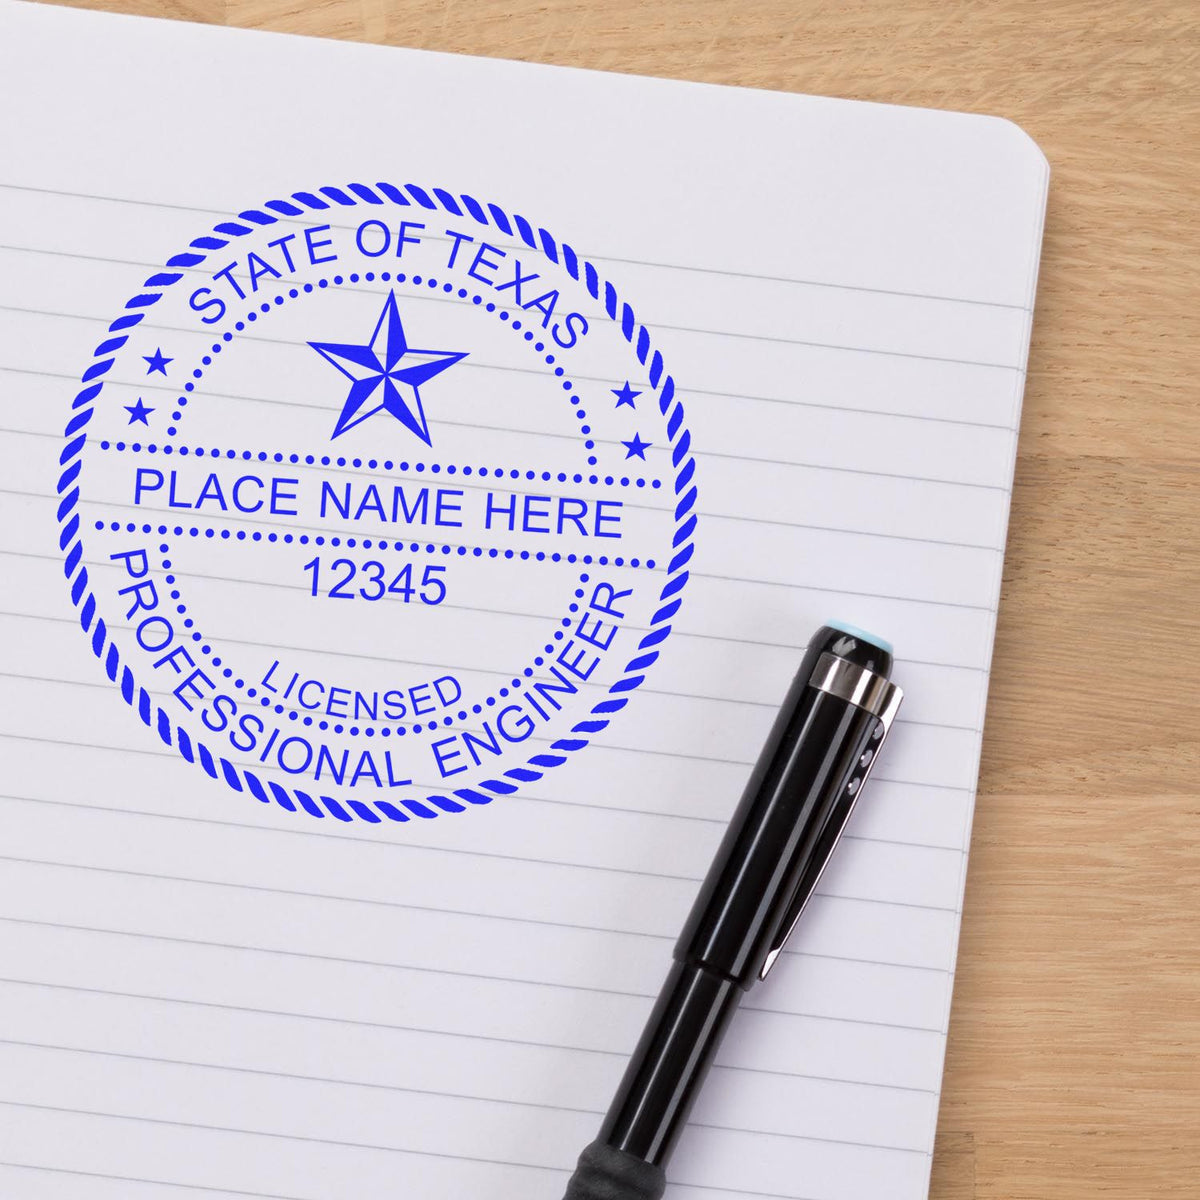 The Slim Pre-Inked Texas Professional Engineer Seal Stamp stamp impression comes to life with a crisp, detailed photo on paper - showcasing true professional quality.